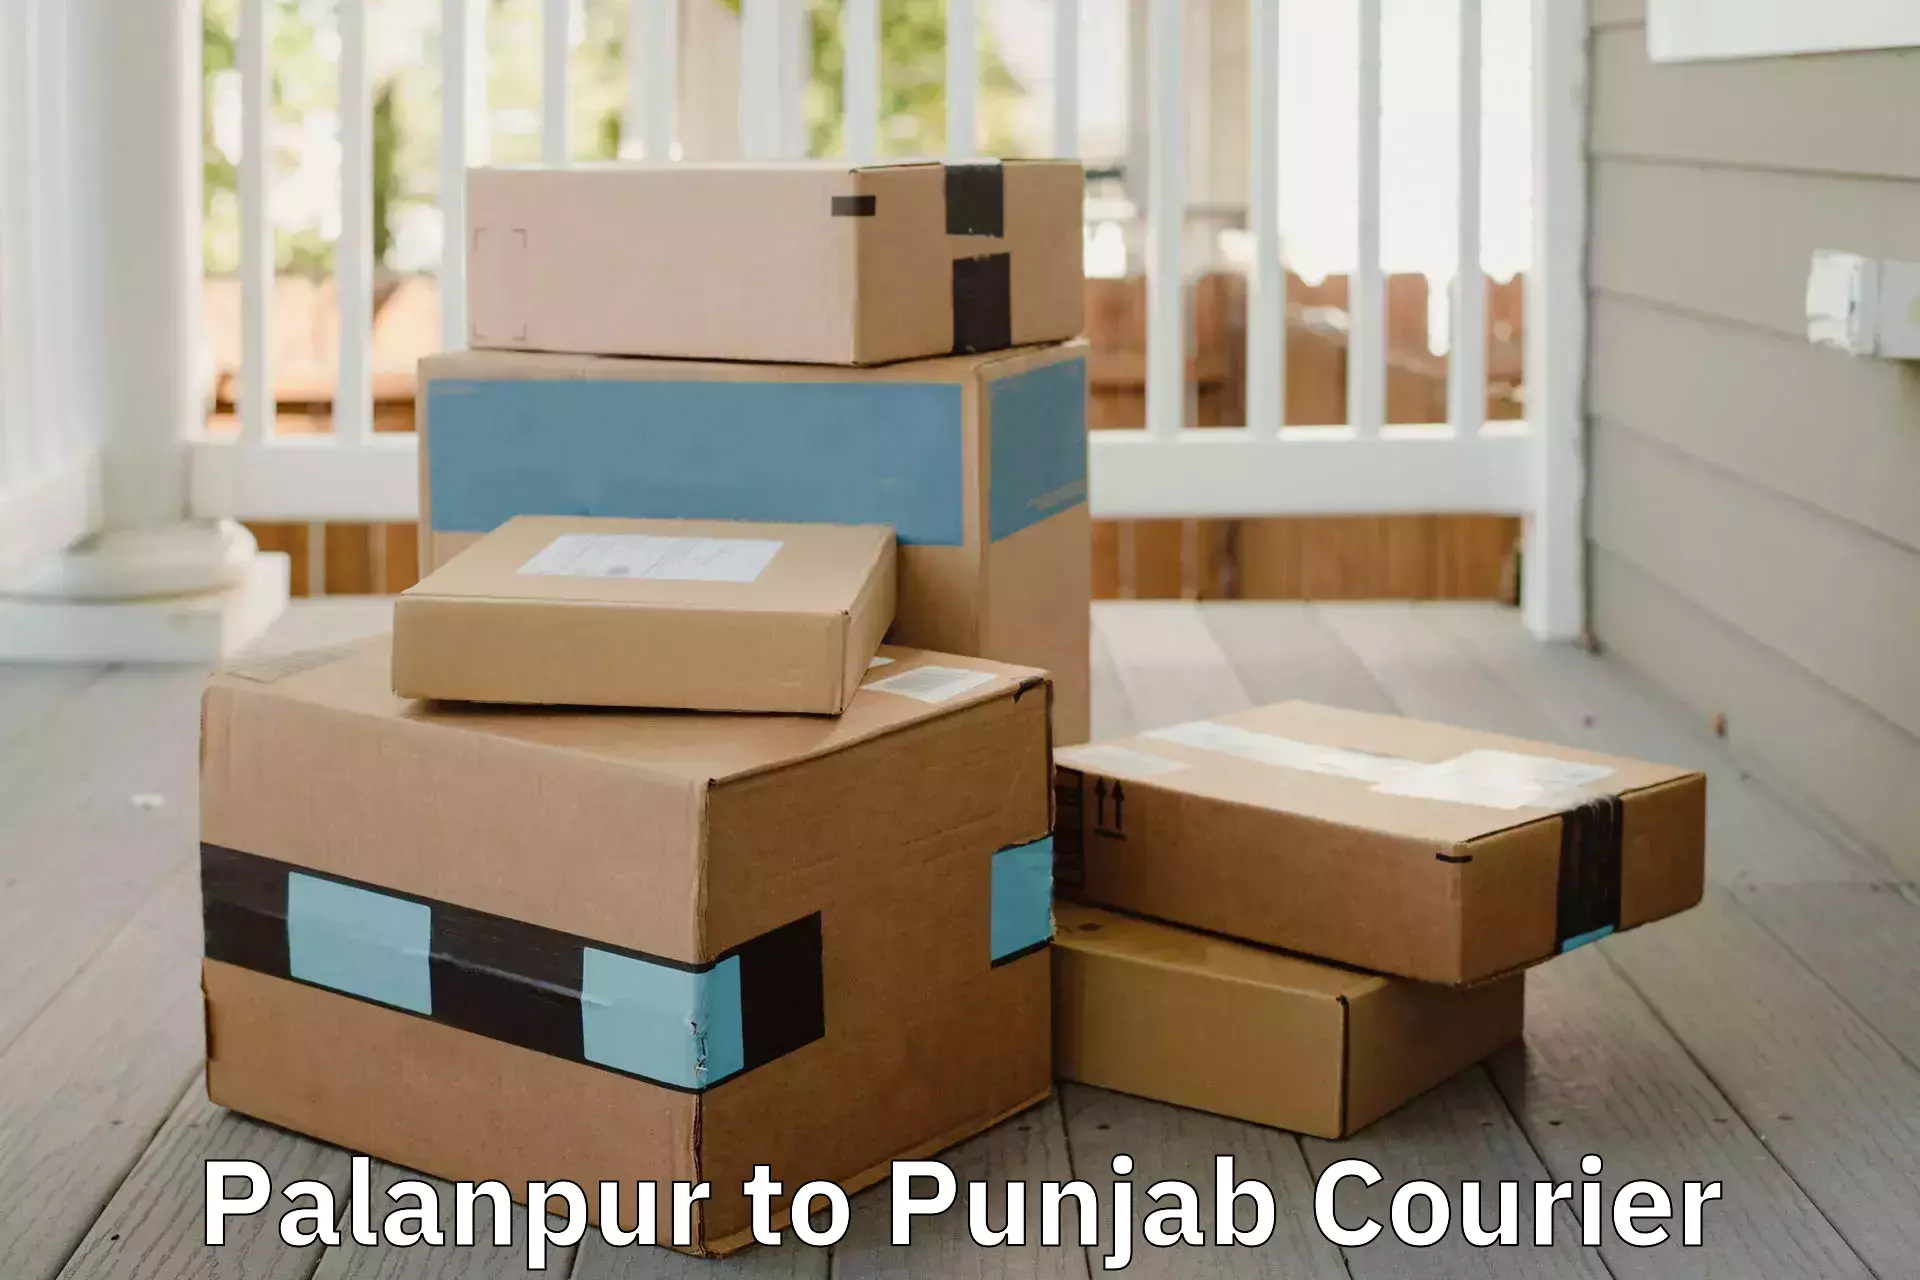 Trusted relocation experts Palanpur to Central University of Punjab Bathinda